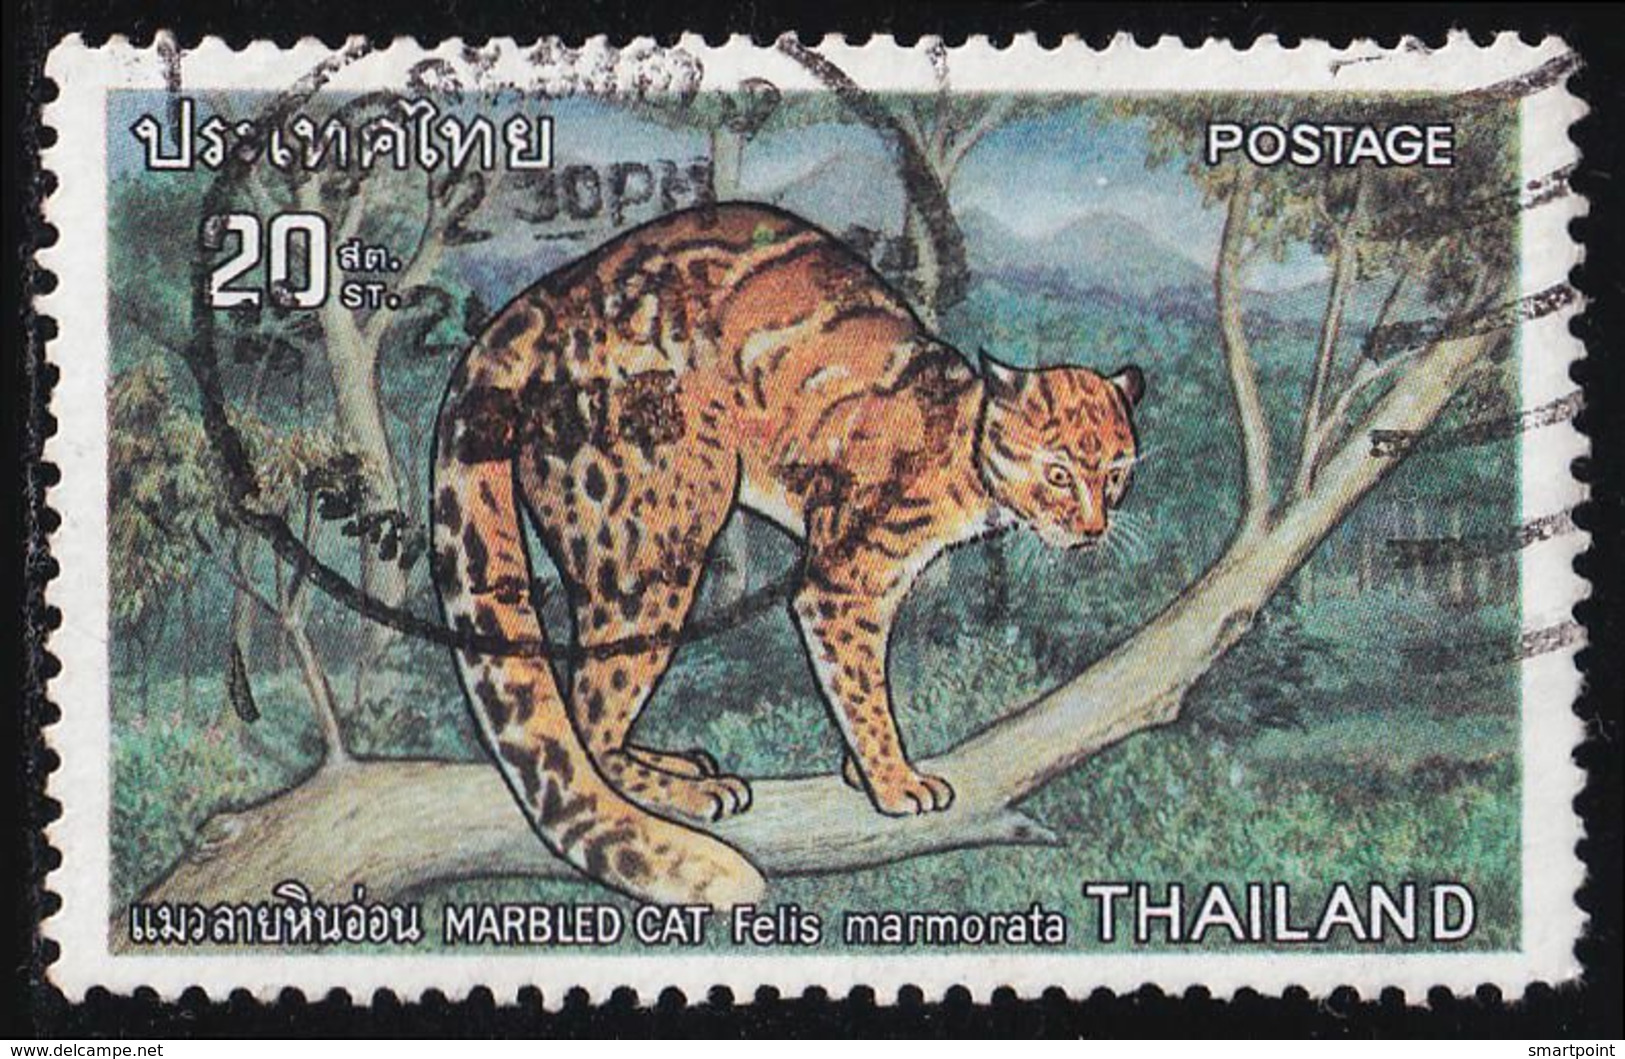 Thailand Stamp 1975 Protected Wild Animals (2nd Series) 20 Satang - Used - Thailand